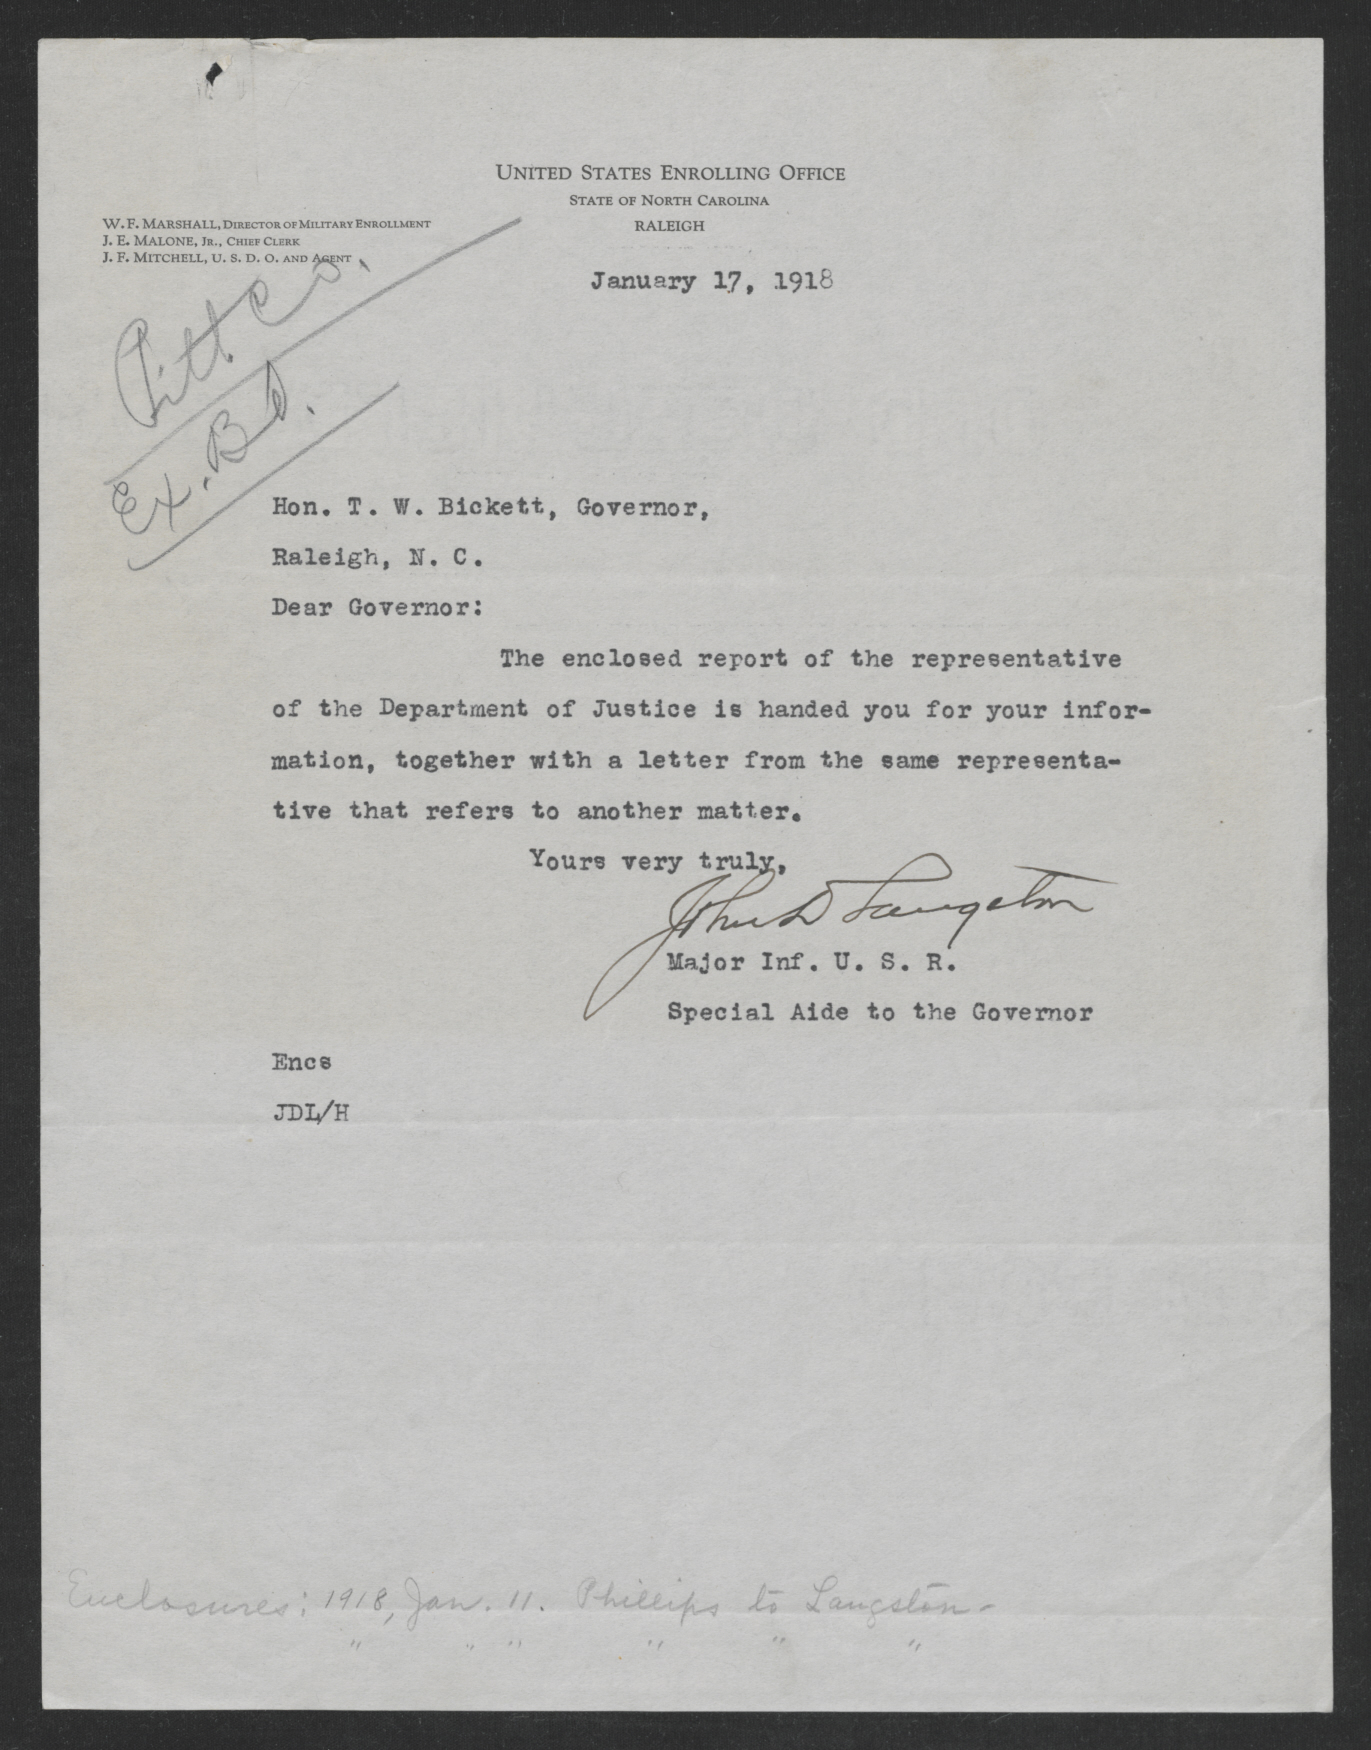 Letter from John D. Langston to Thomas W. Bickett, January 17, 1918